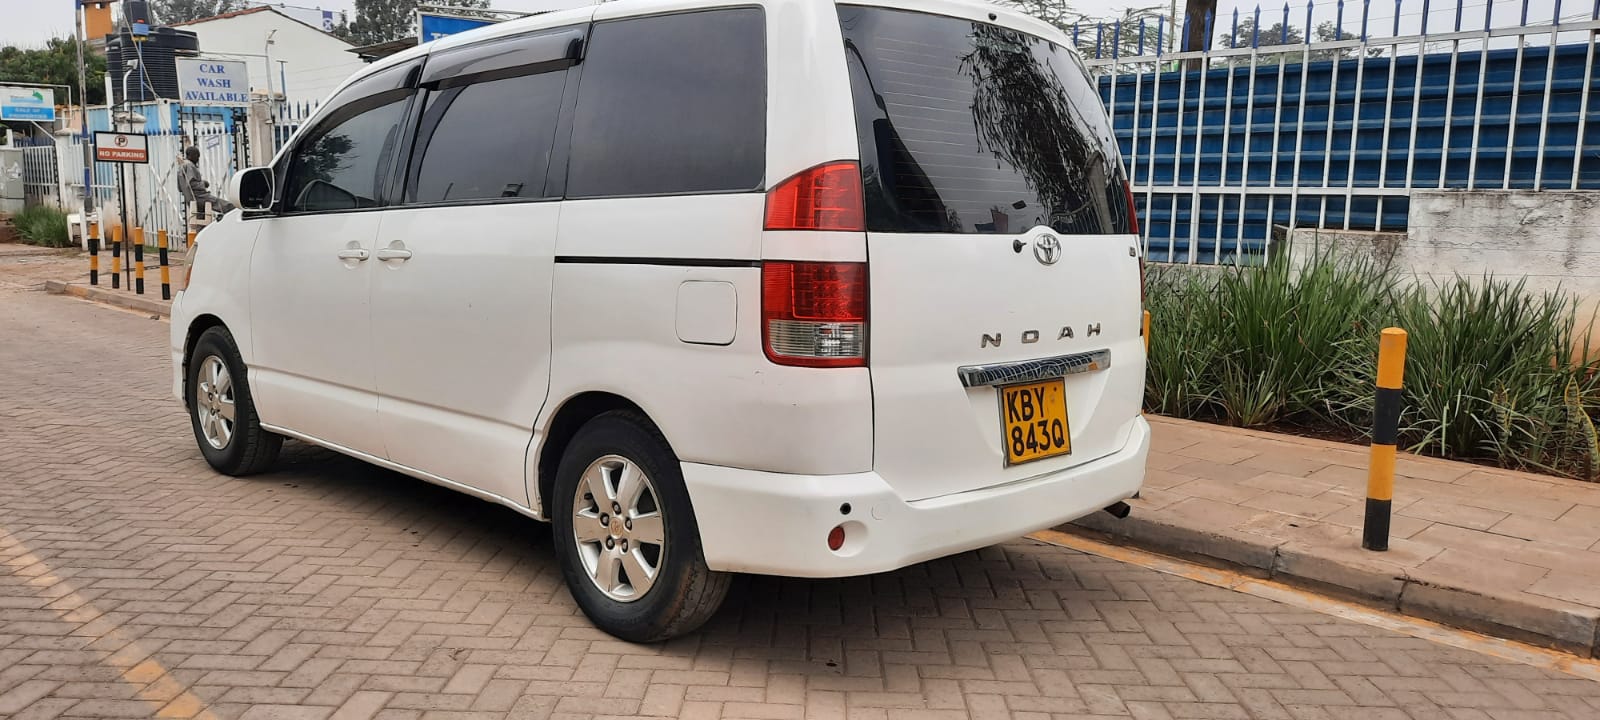 Toyota Noah 2007 Pay 20% 80% in 60 MONTHLY INSTALLMENTS as New